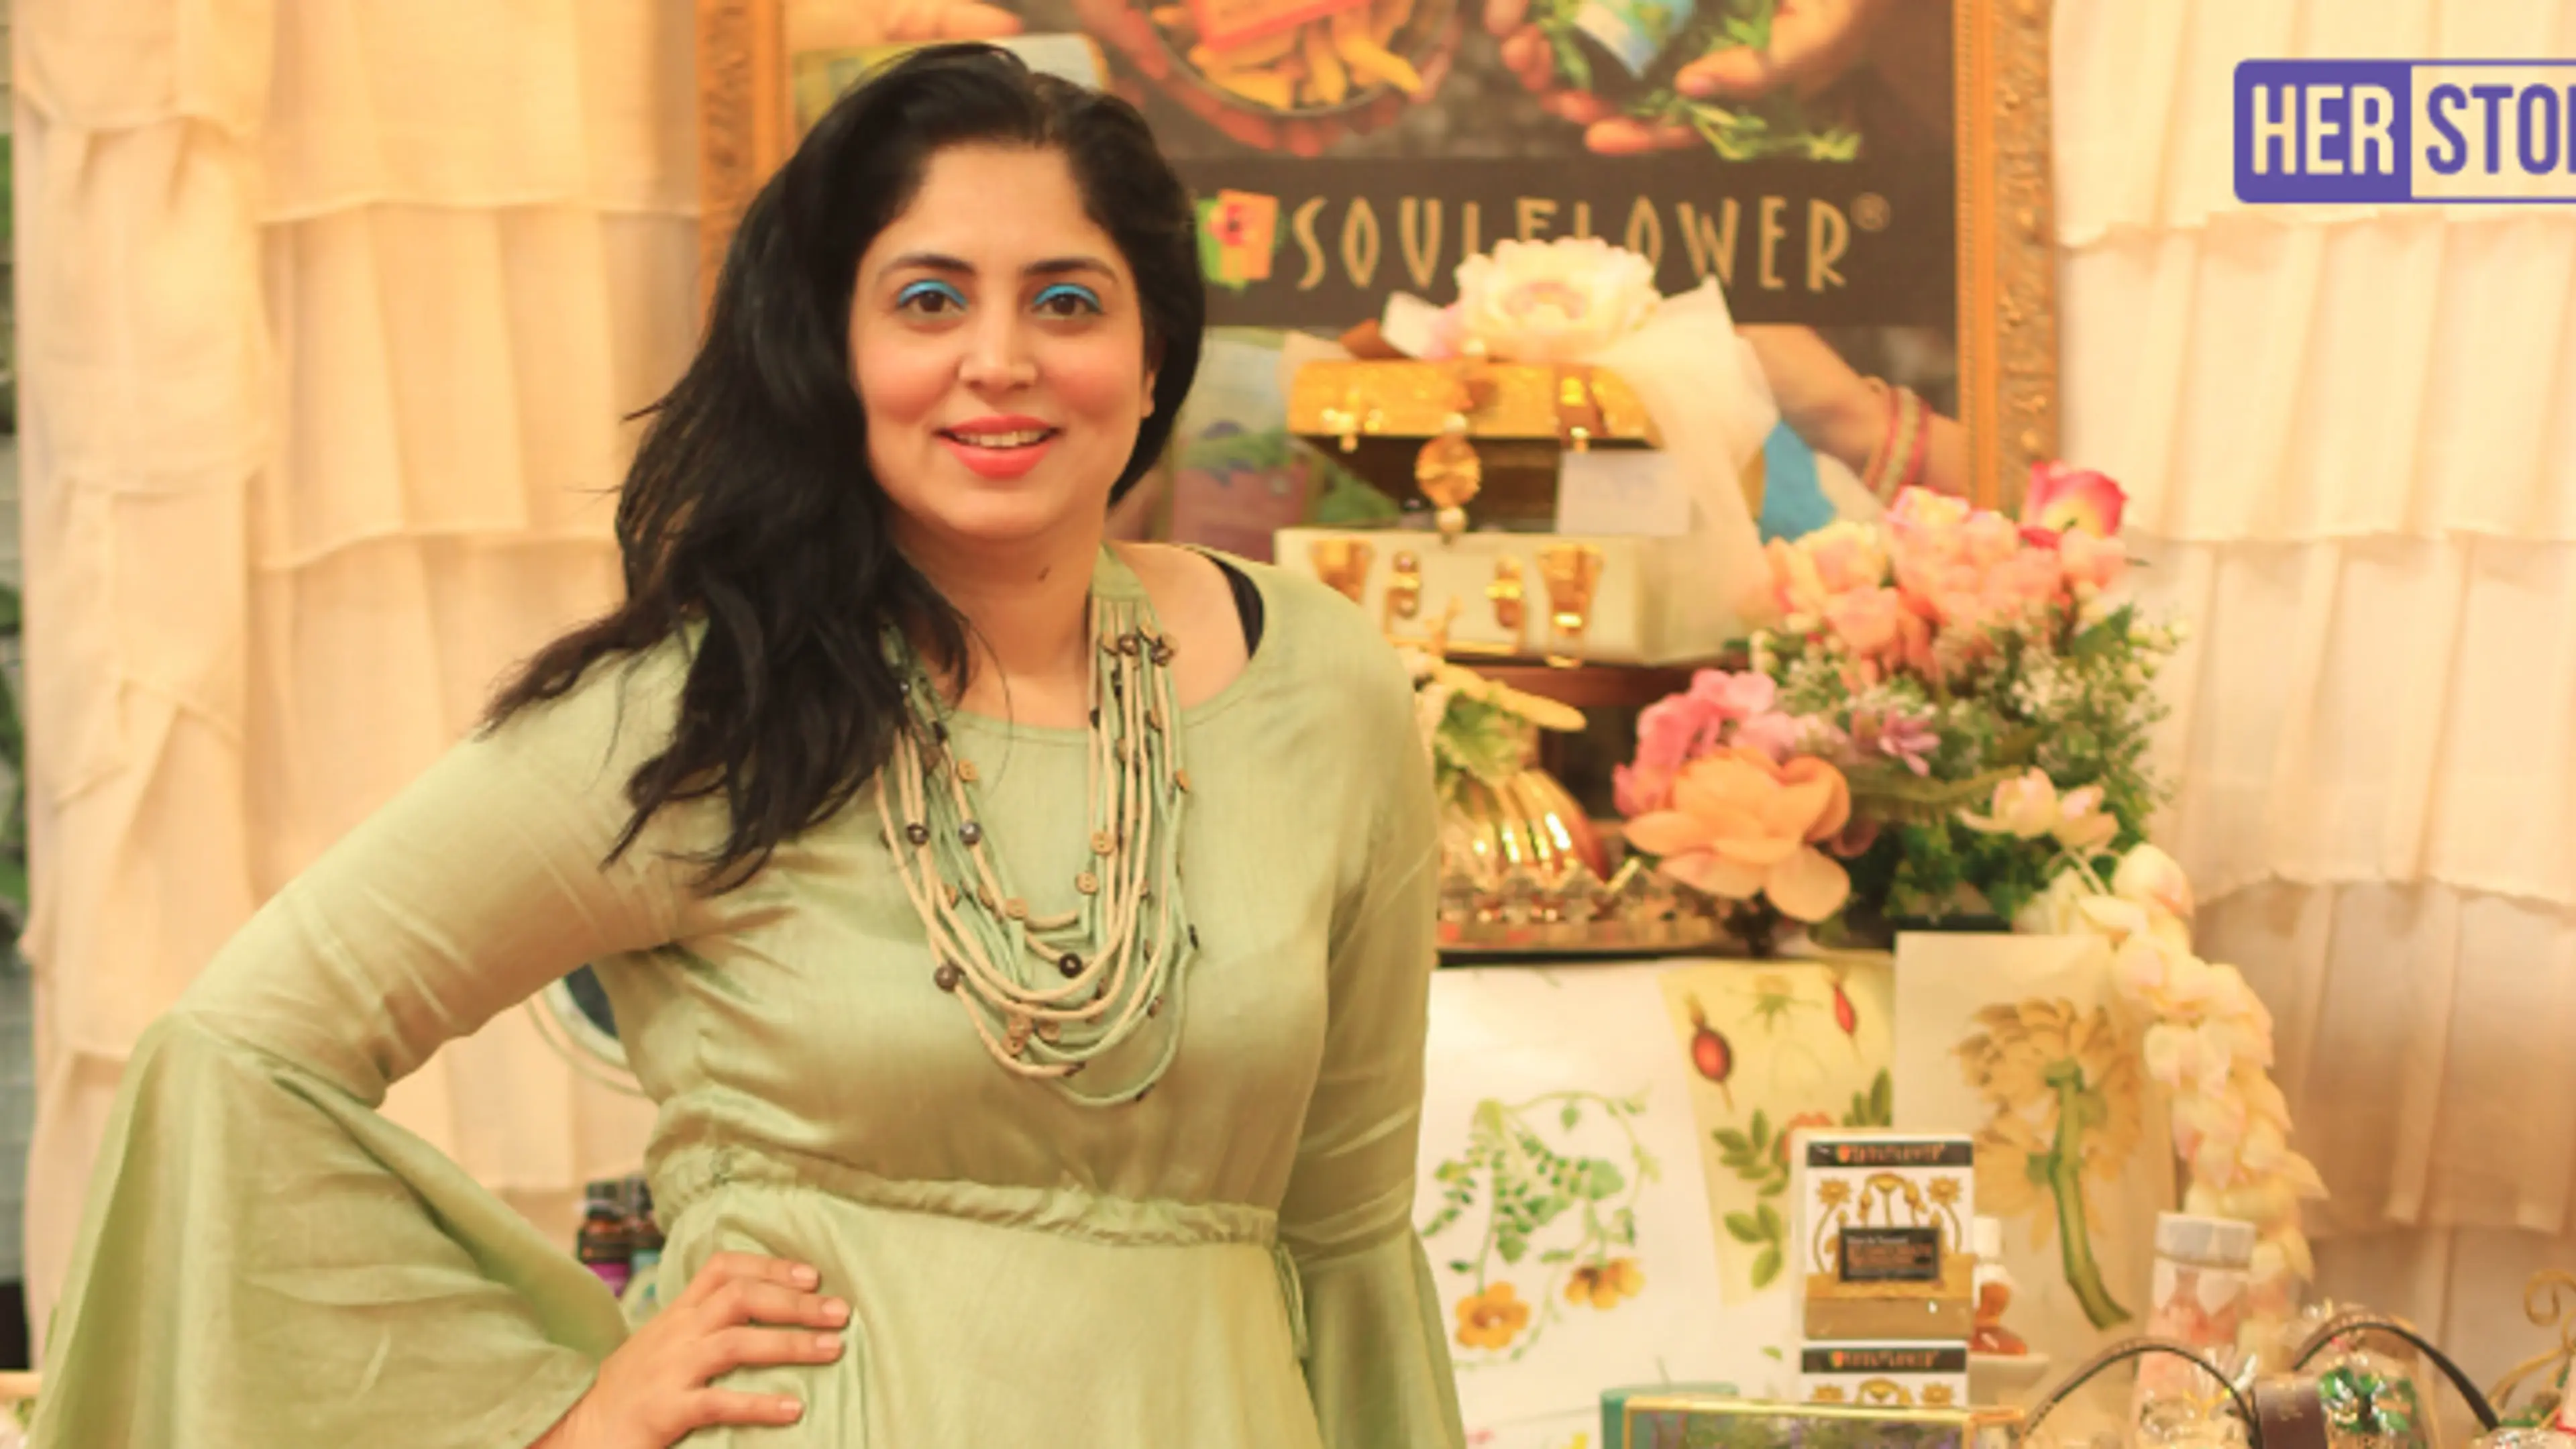 How Soulflower grew as a natural personal care brand in the last two decades